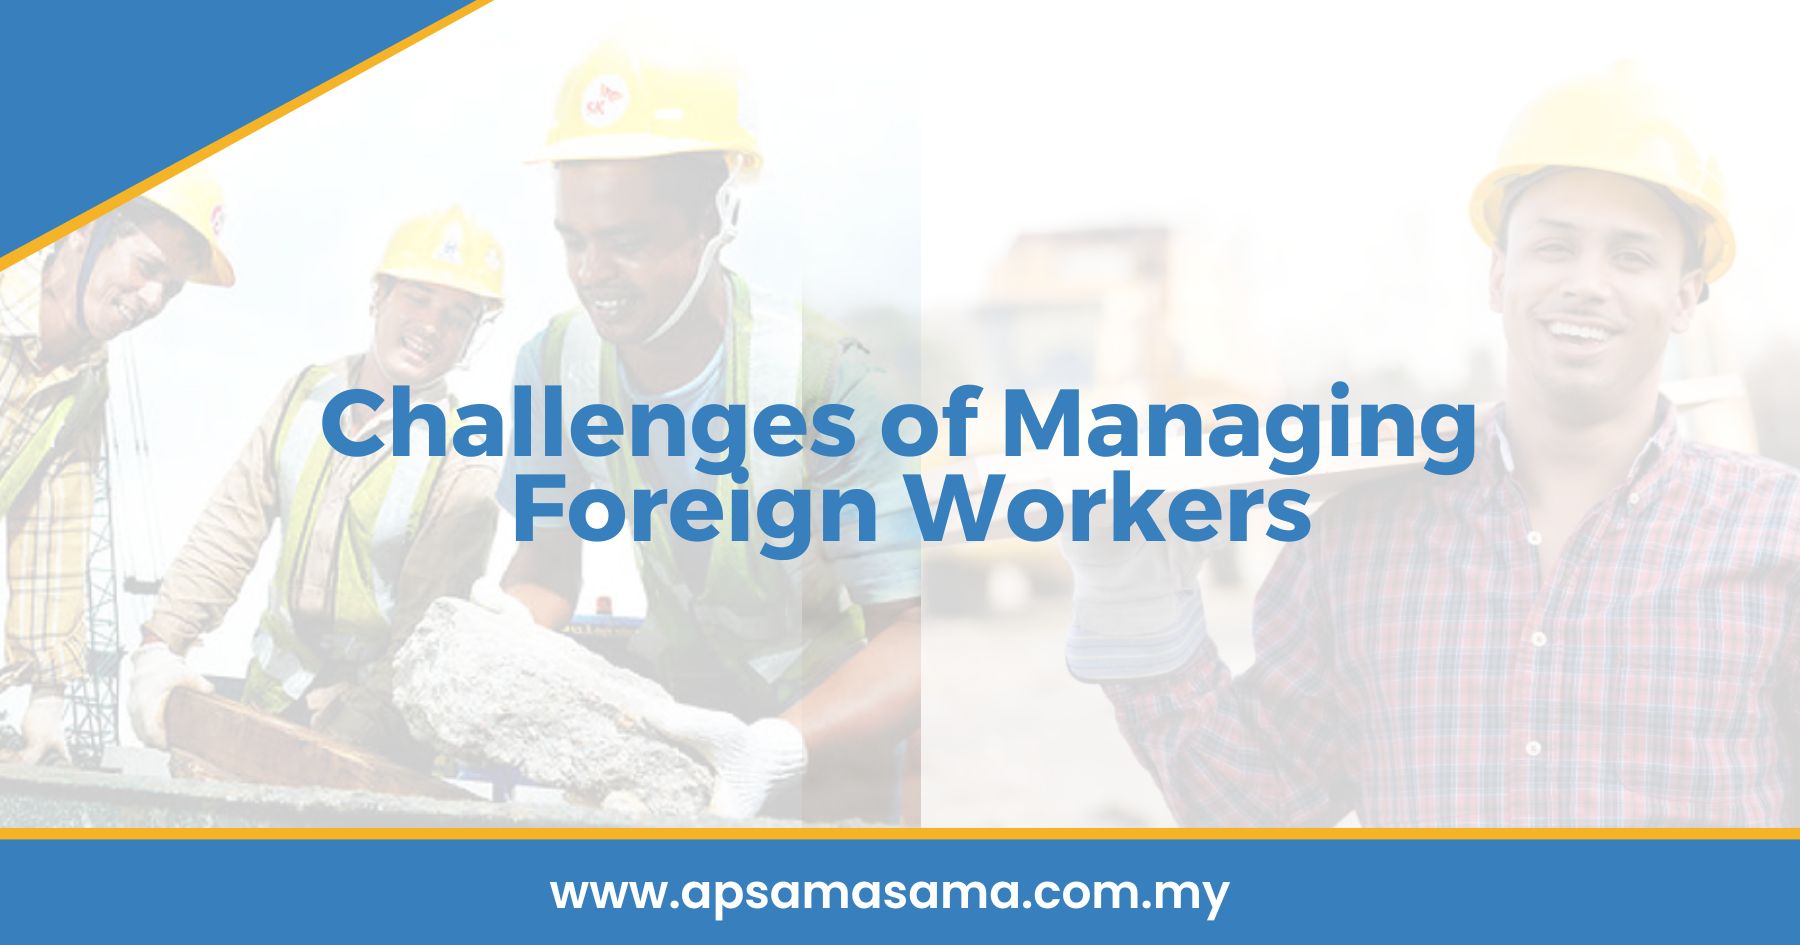 Challenges of Managing Foreign Workers